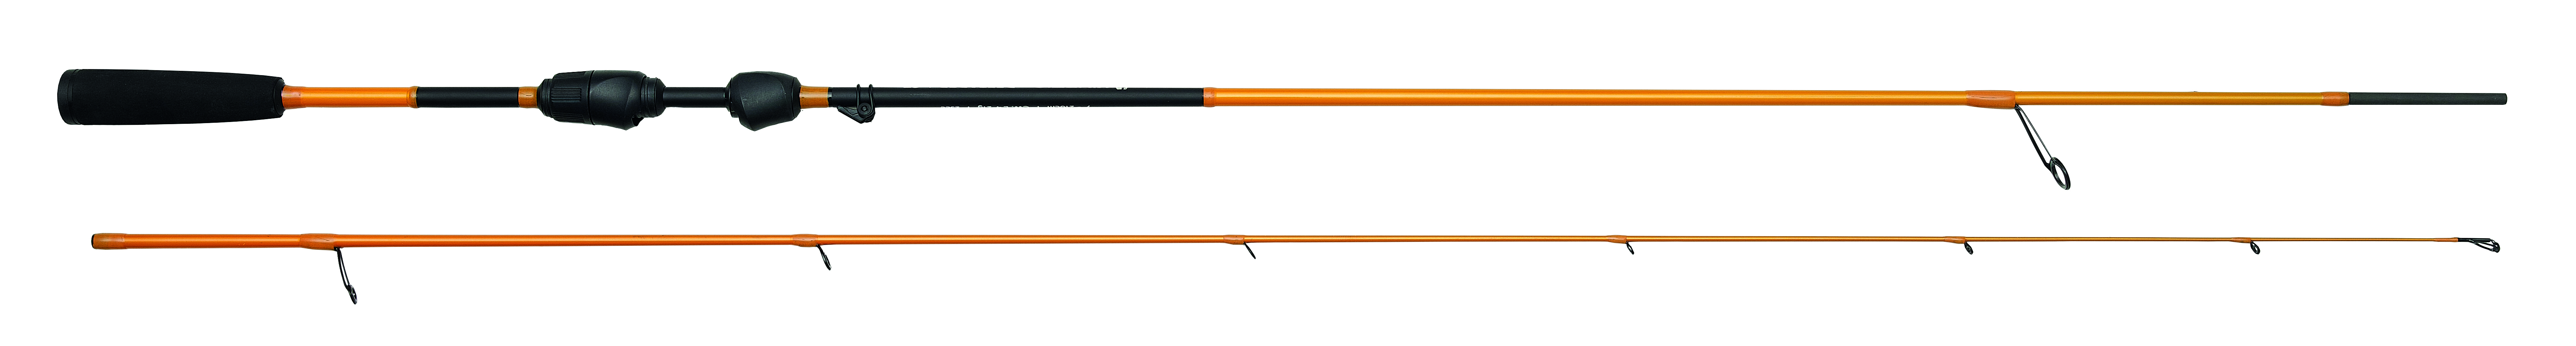 What parameters should a rod for UL spinning have?